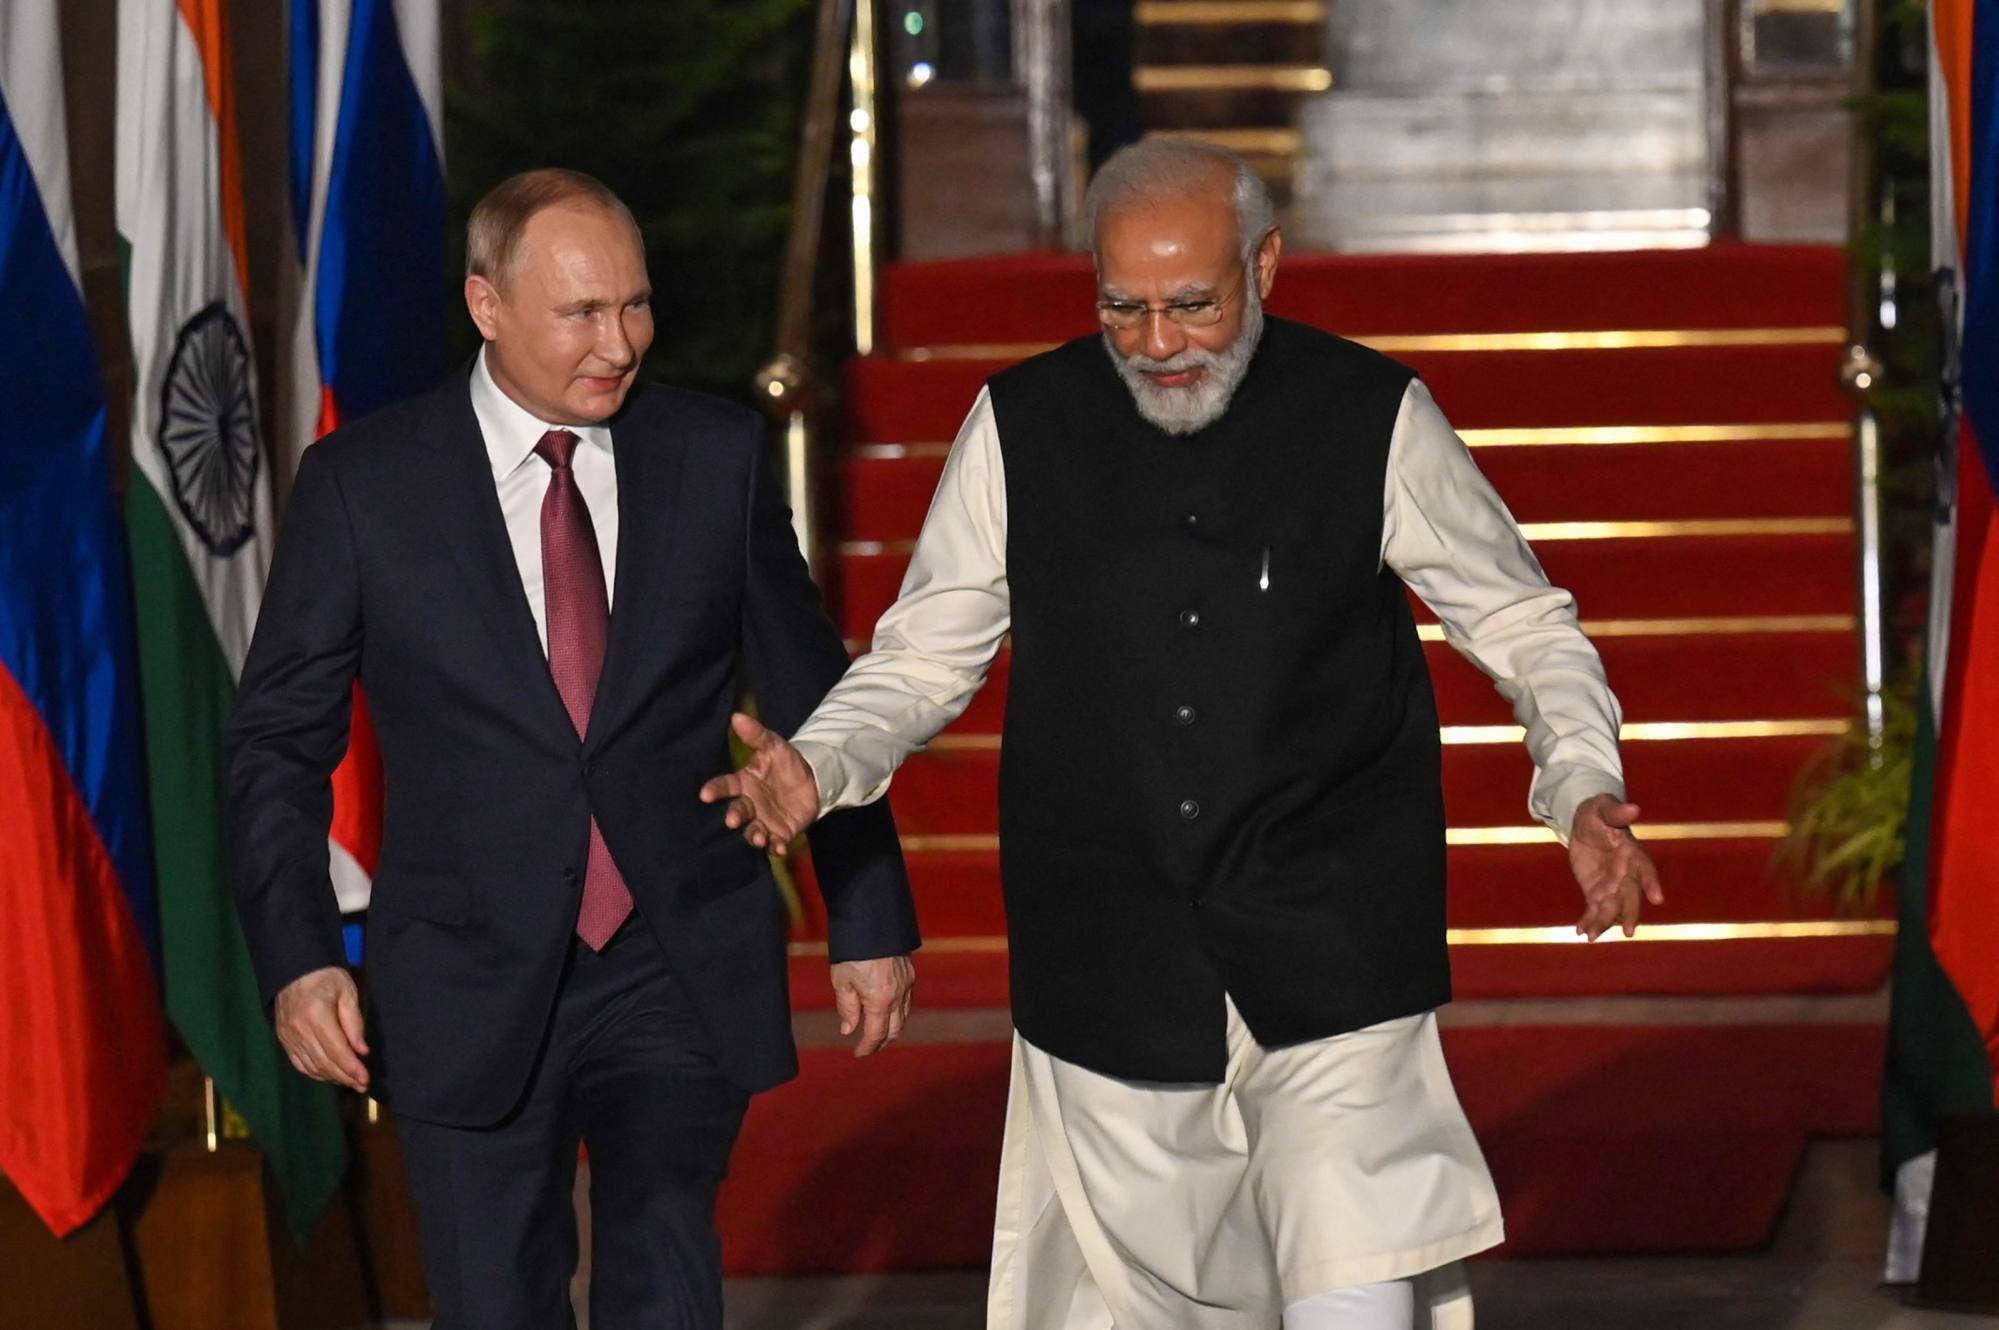 Modi greets Putin before their meeting at Hyderabad House in New Delhi on Monday. Photo: AFP